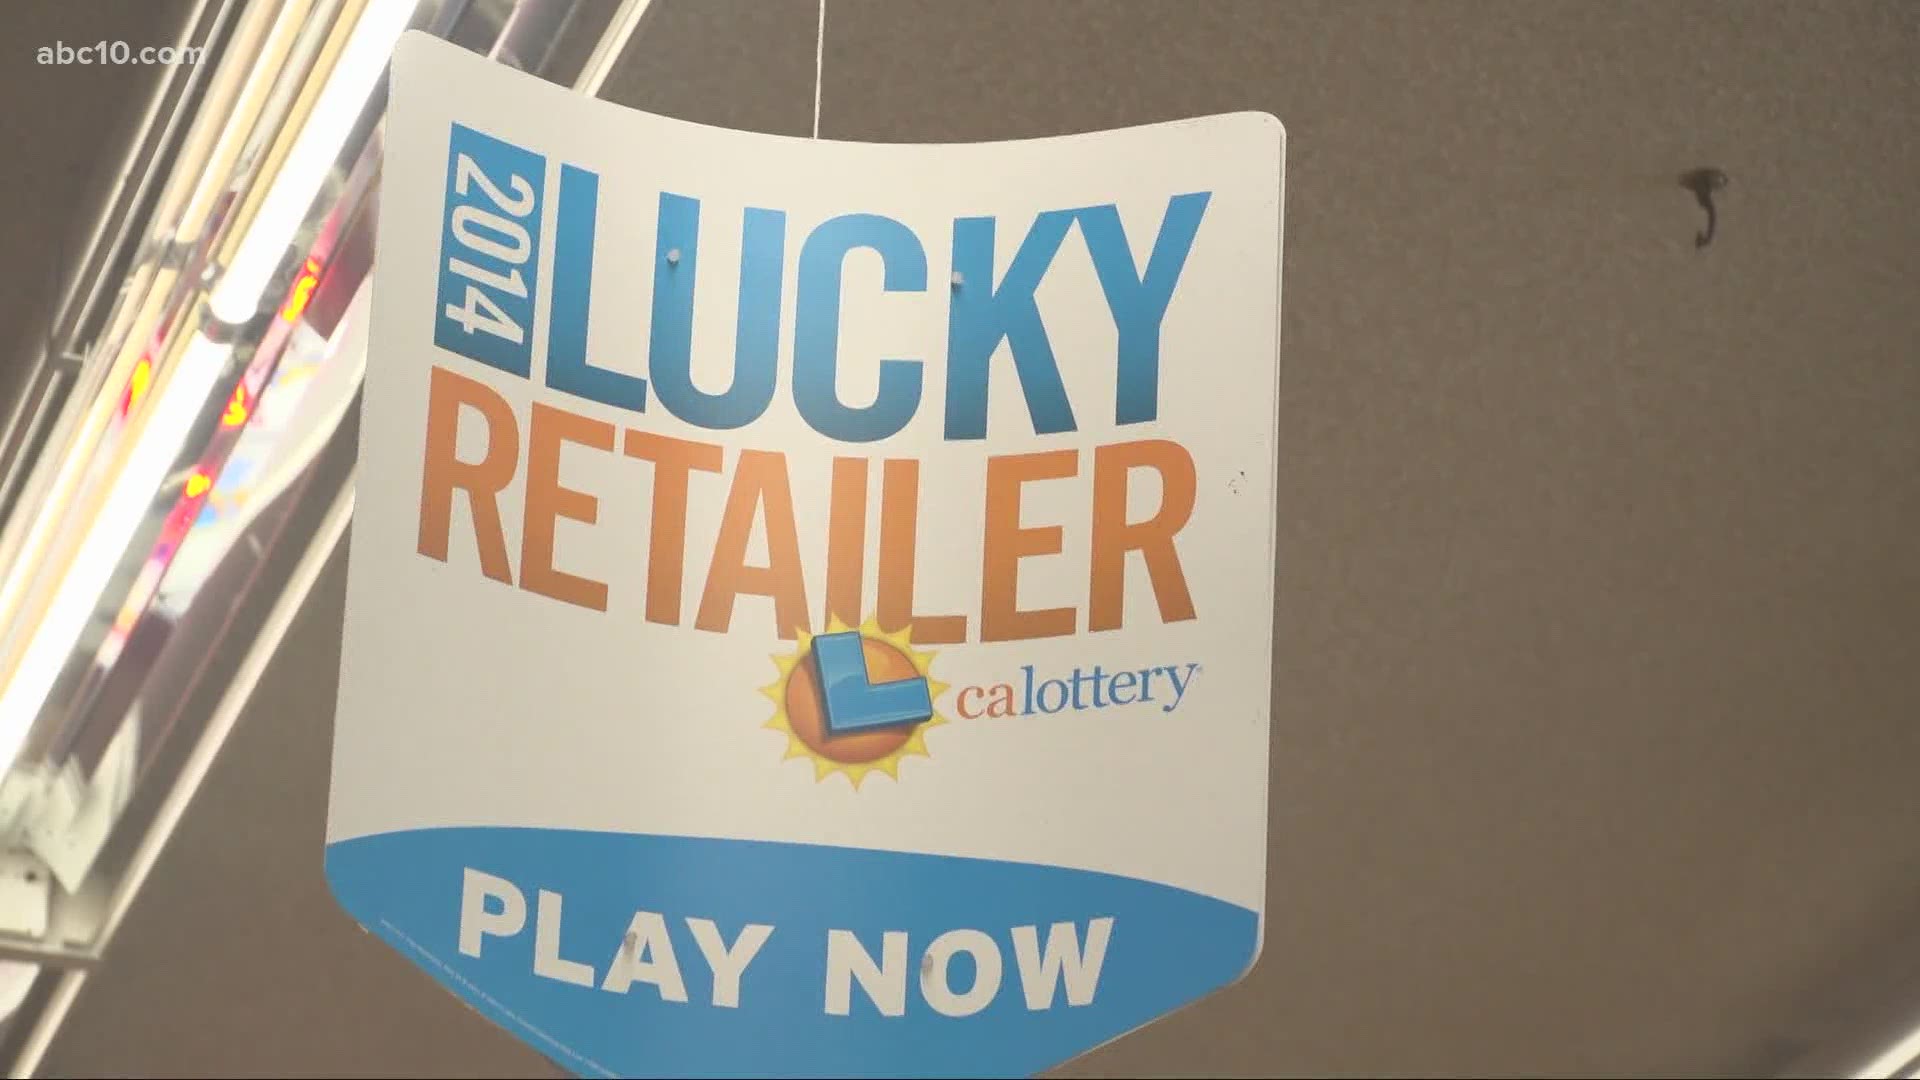 Powerball and MegaMillions are both over $500 million in winnings. Lachine's Liquor and Deli in Land Park is considered a lucky spot for California lottery winners.